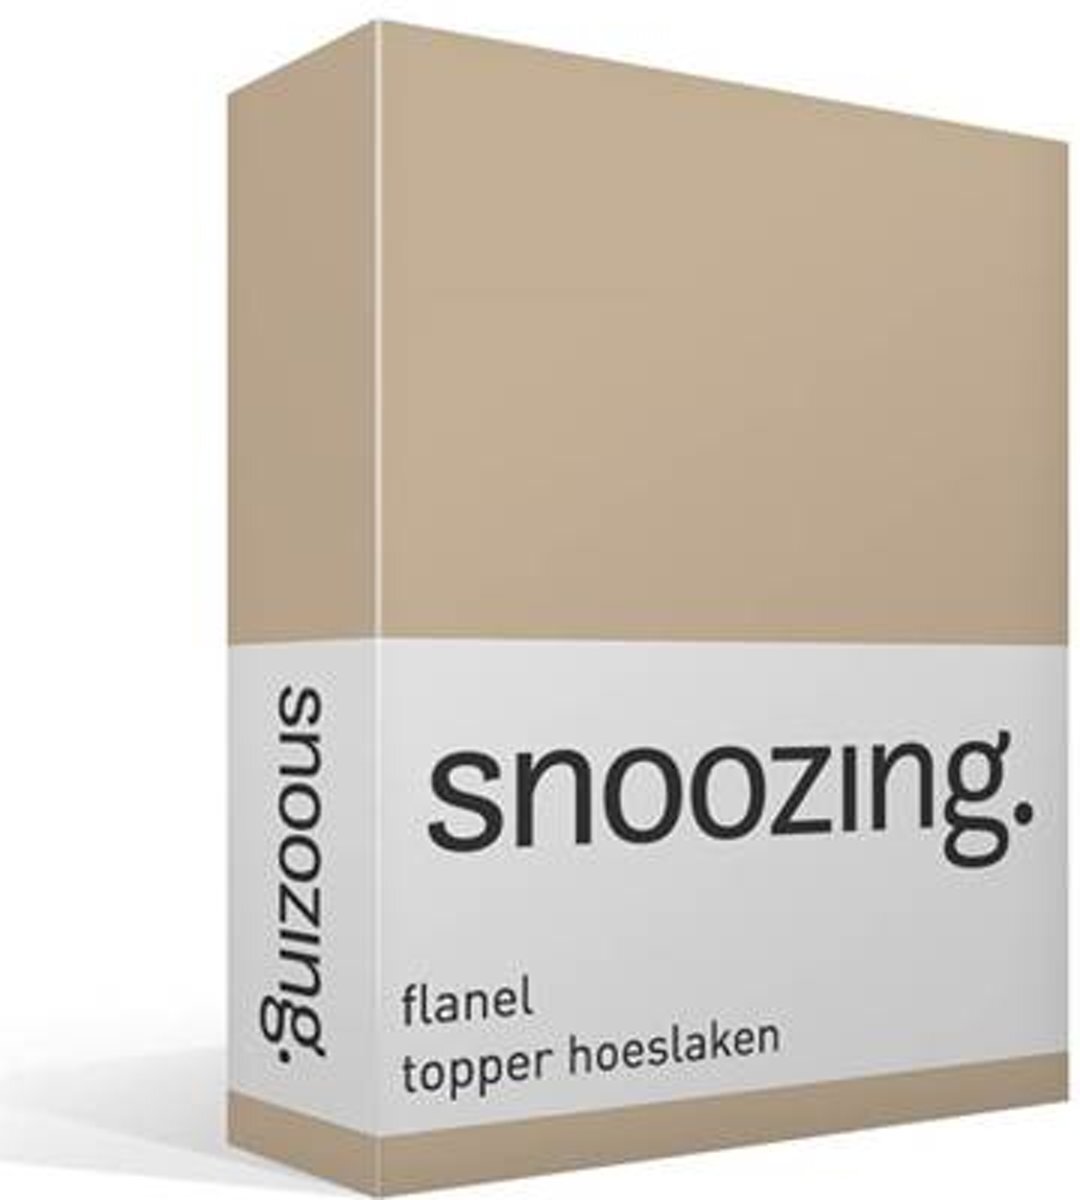 Snoozing flanel topper hoeslaken - 1-persoons (80/90x200 cm) - 100%